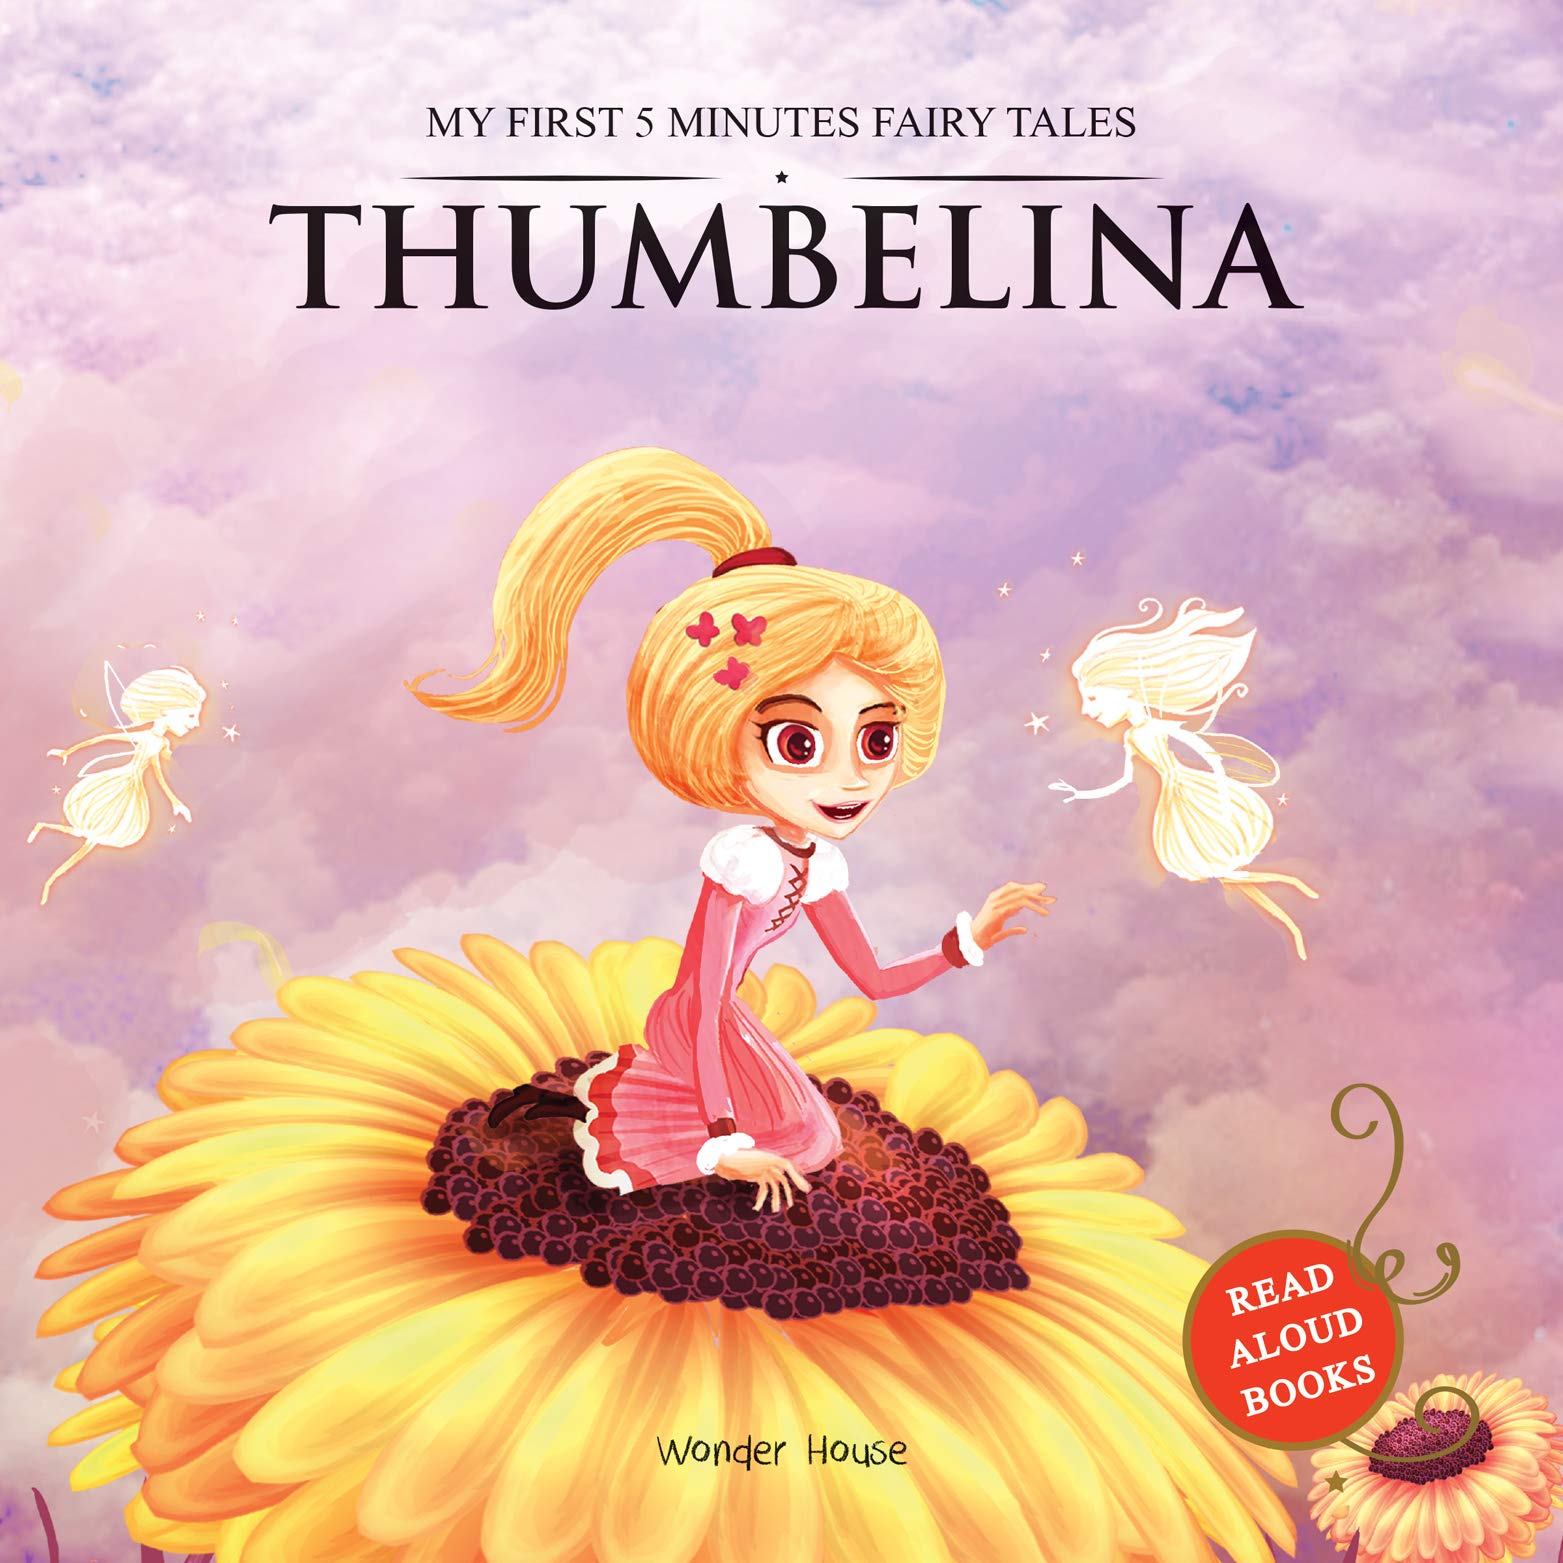 My First 5 Minutes Fairy tales Thumbelina (Read Aloud Books)